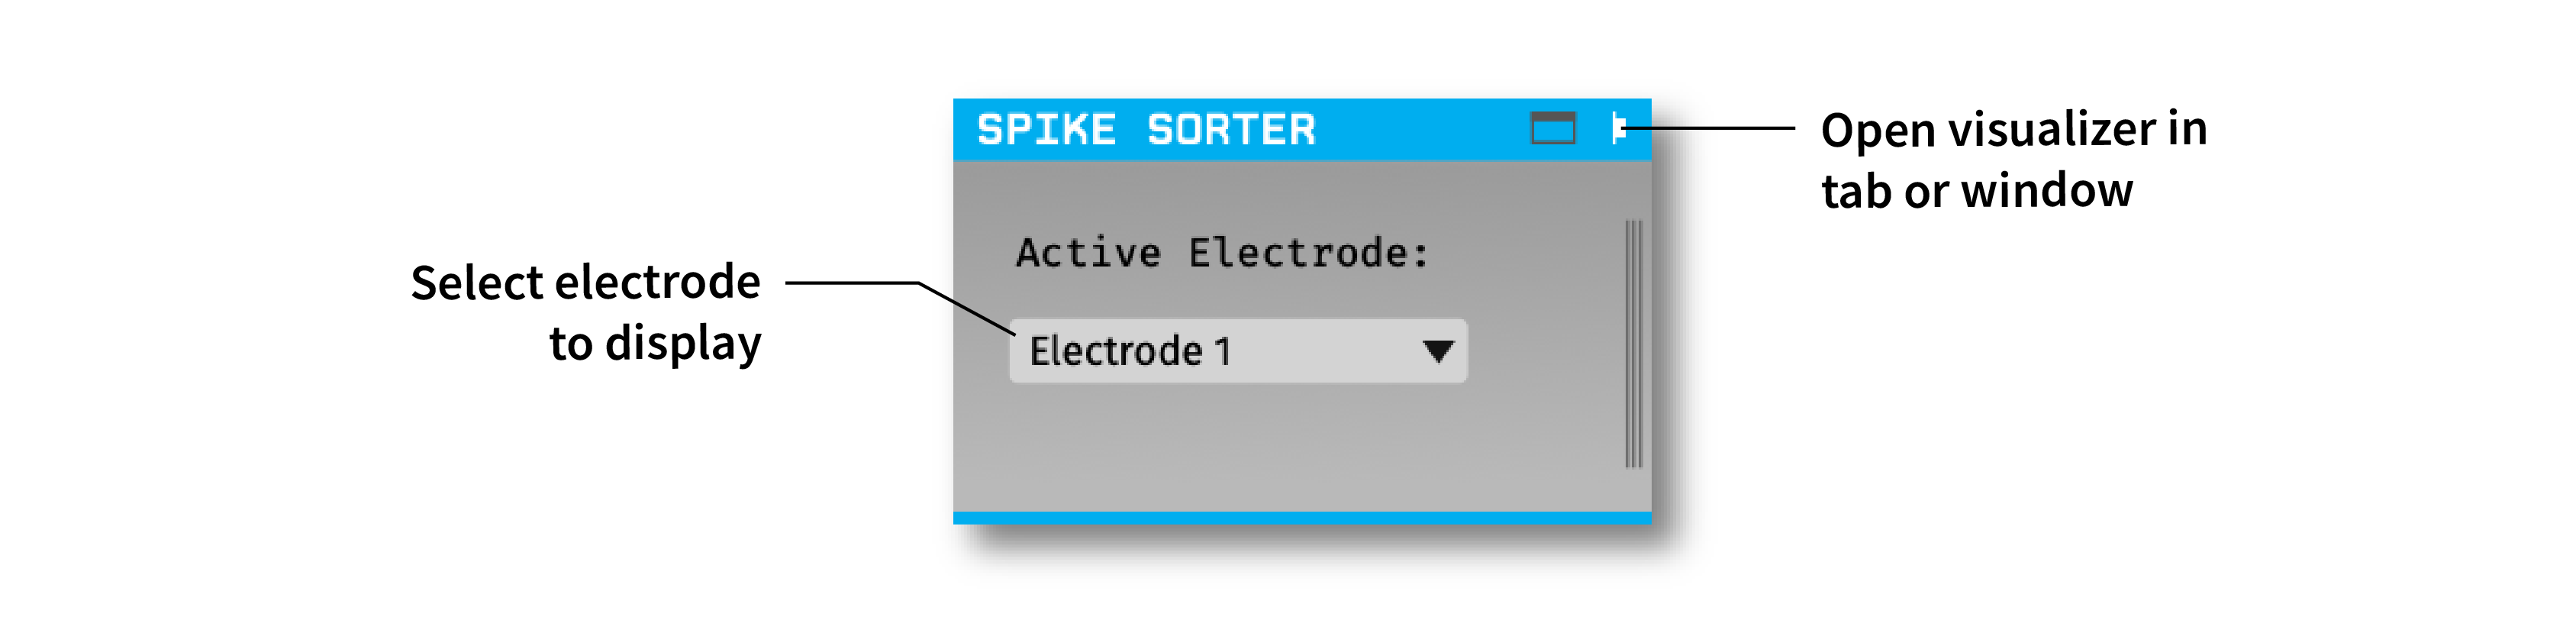 Annotated Spike Sorter settings interface